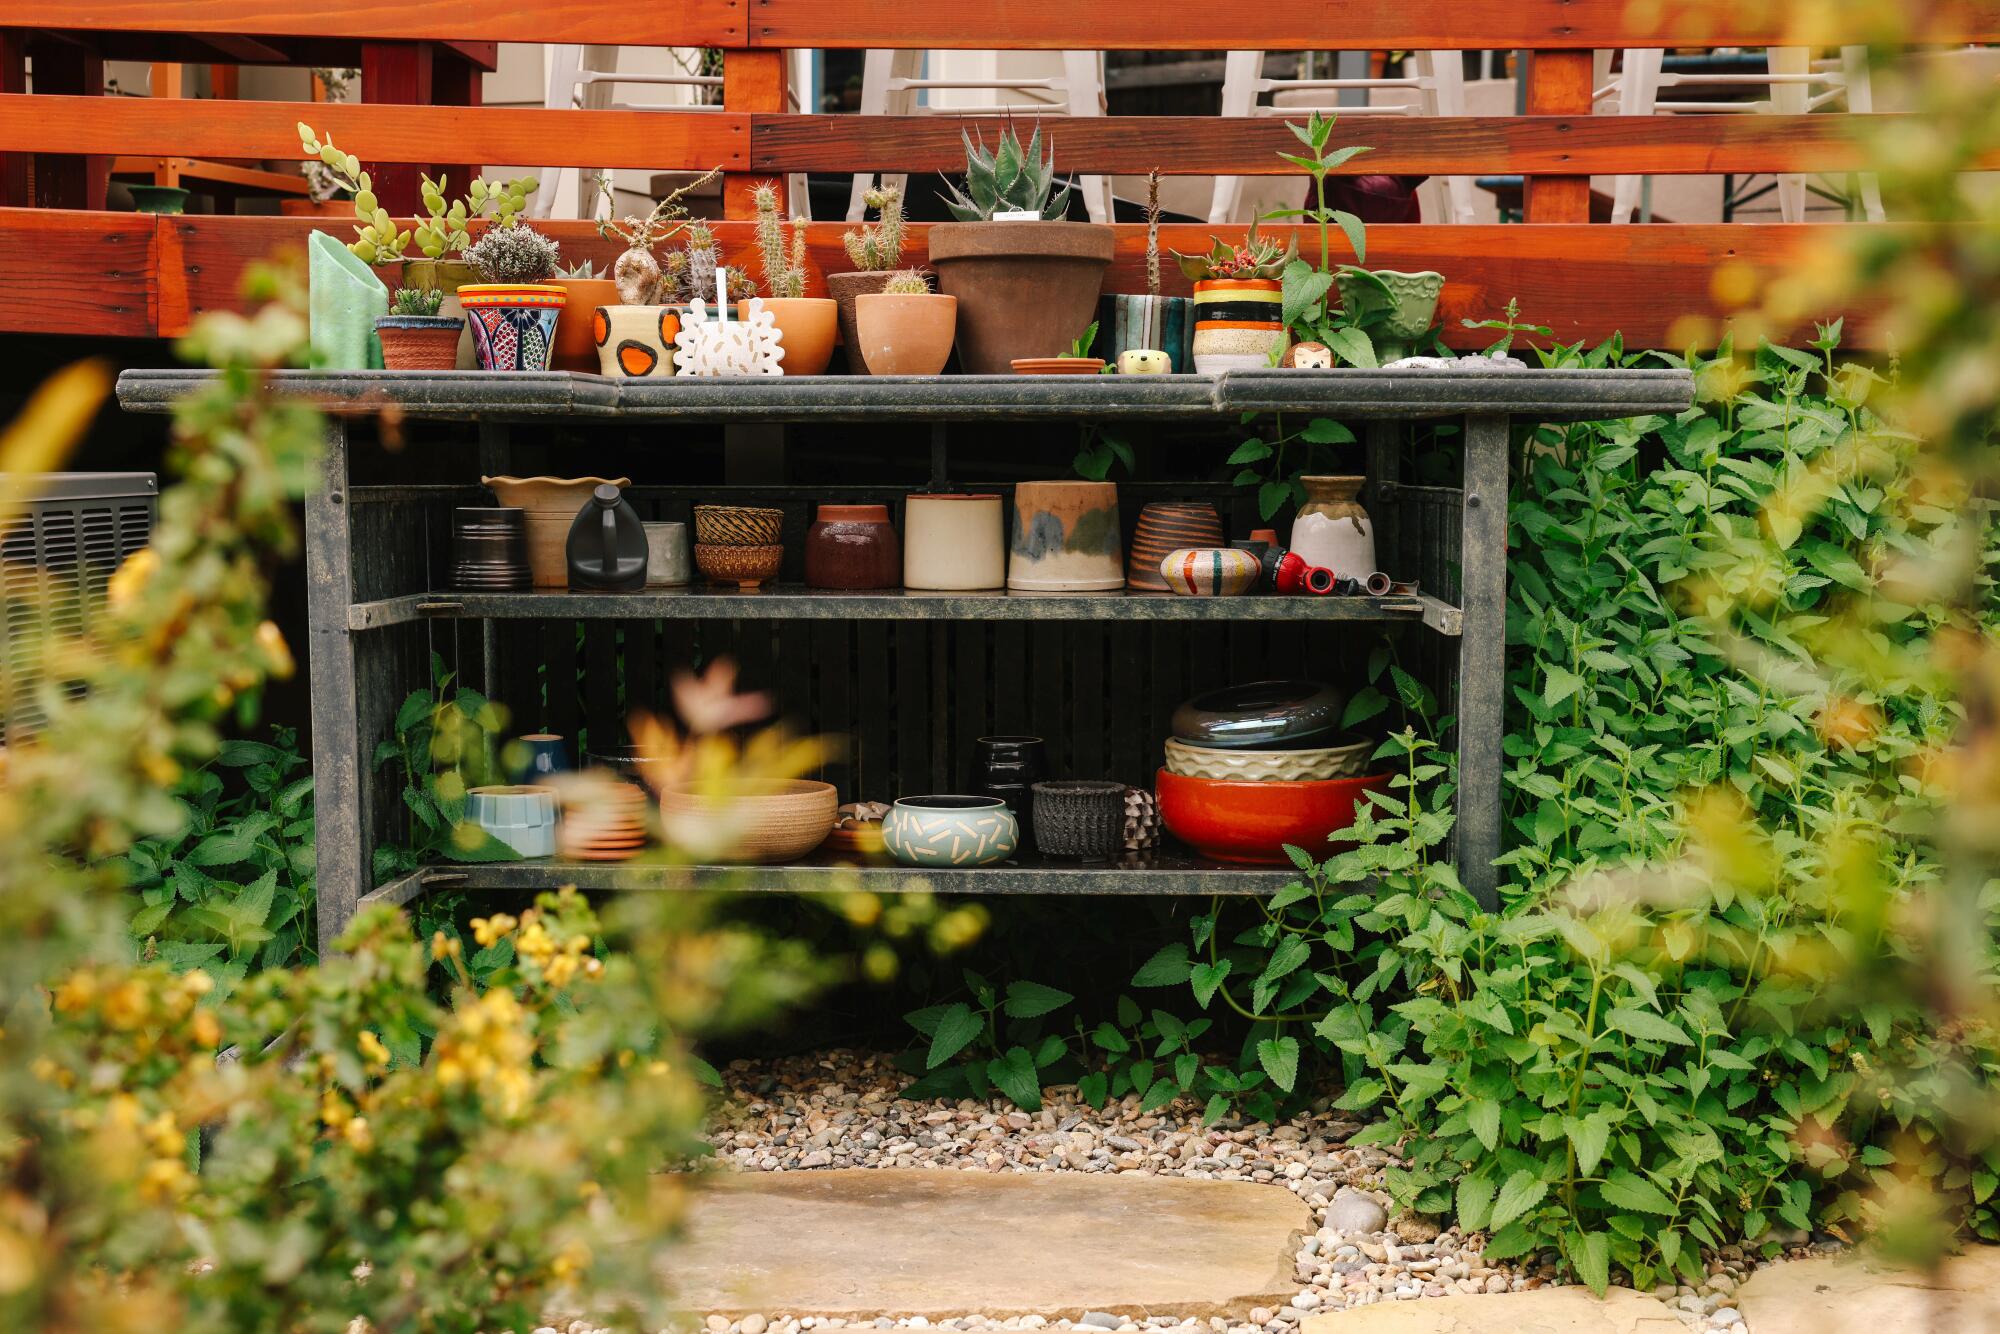 A potting bench filled with pots and surrounded by plants growing at its base.